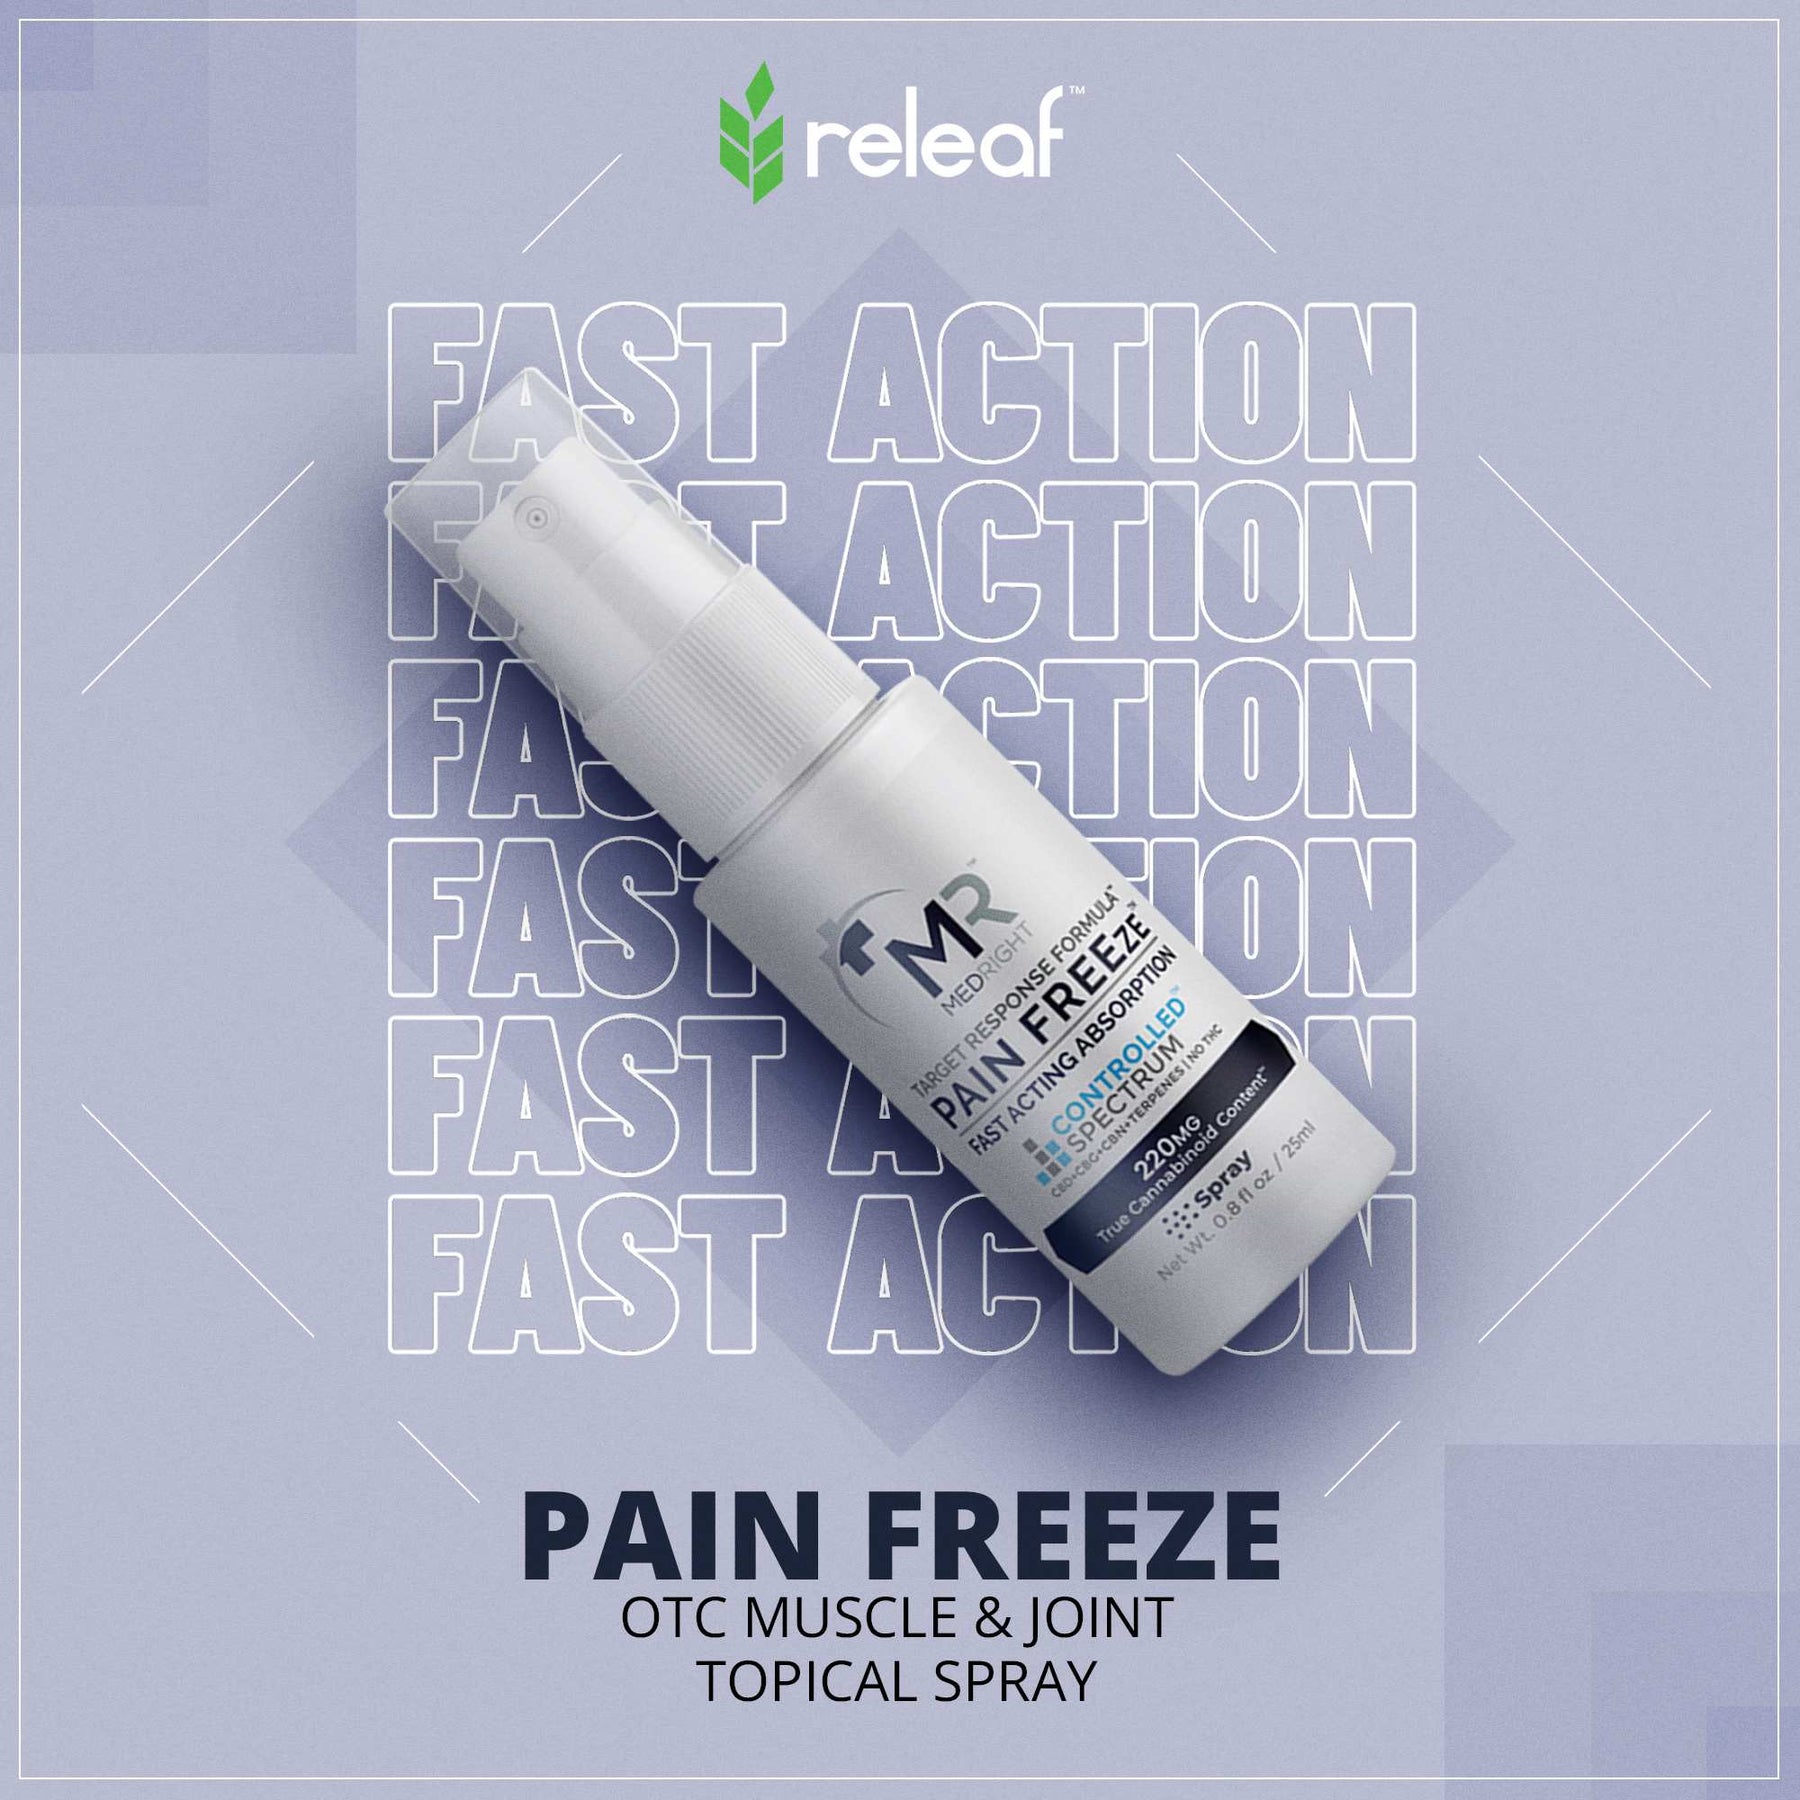 Pain FREEze™ by MedRight Fast Action Releaf CBD